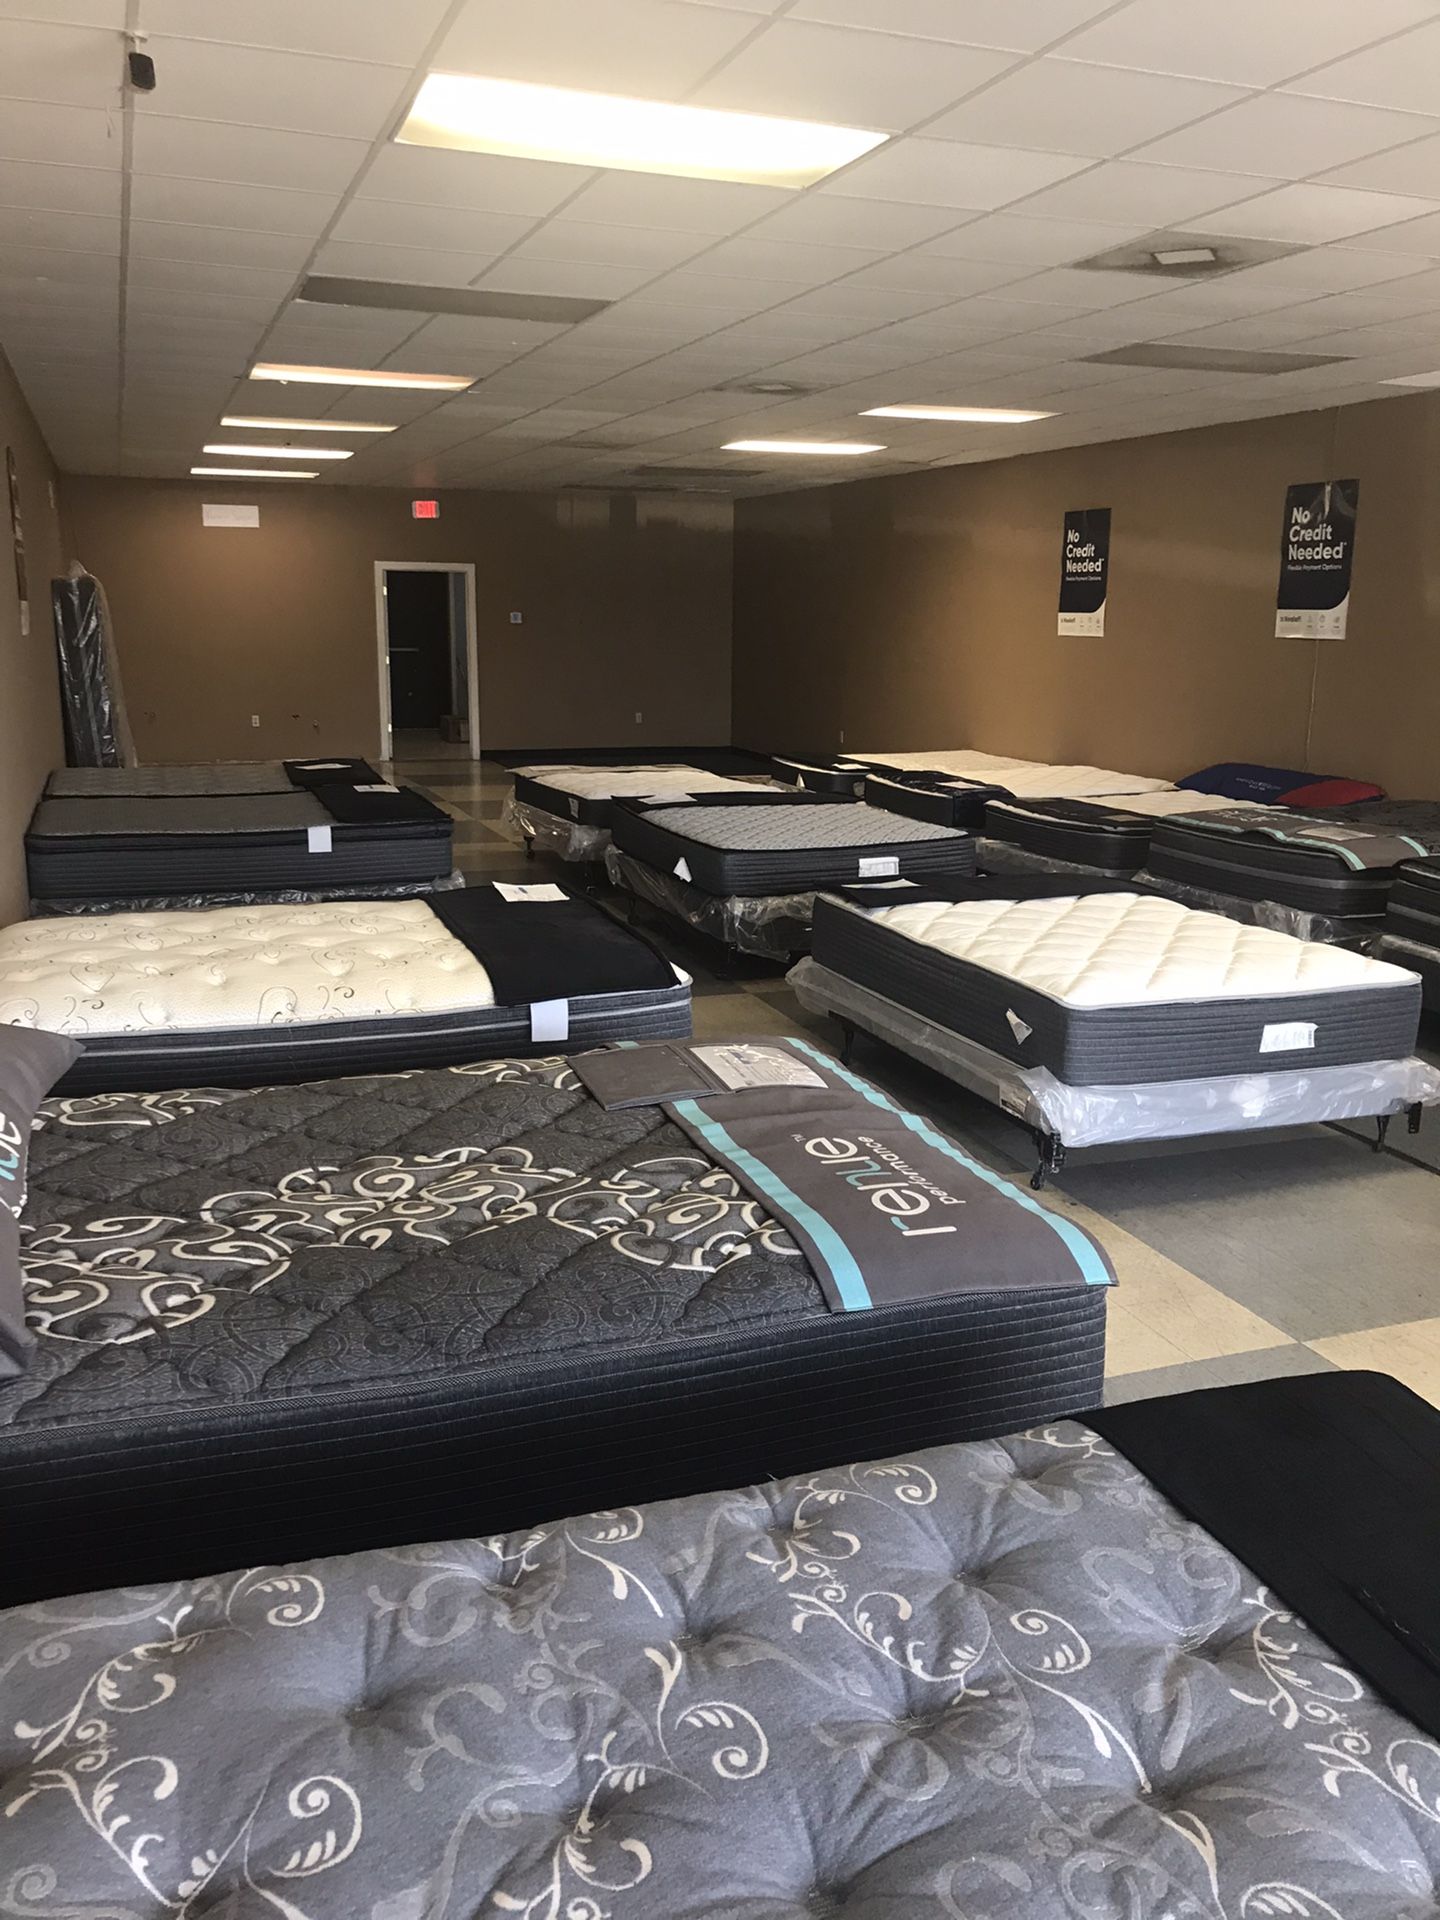 🌟Brand New Twin Mattresses Starting At $89 (all sizes available)🌟